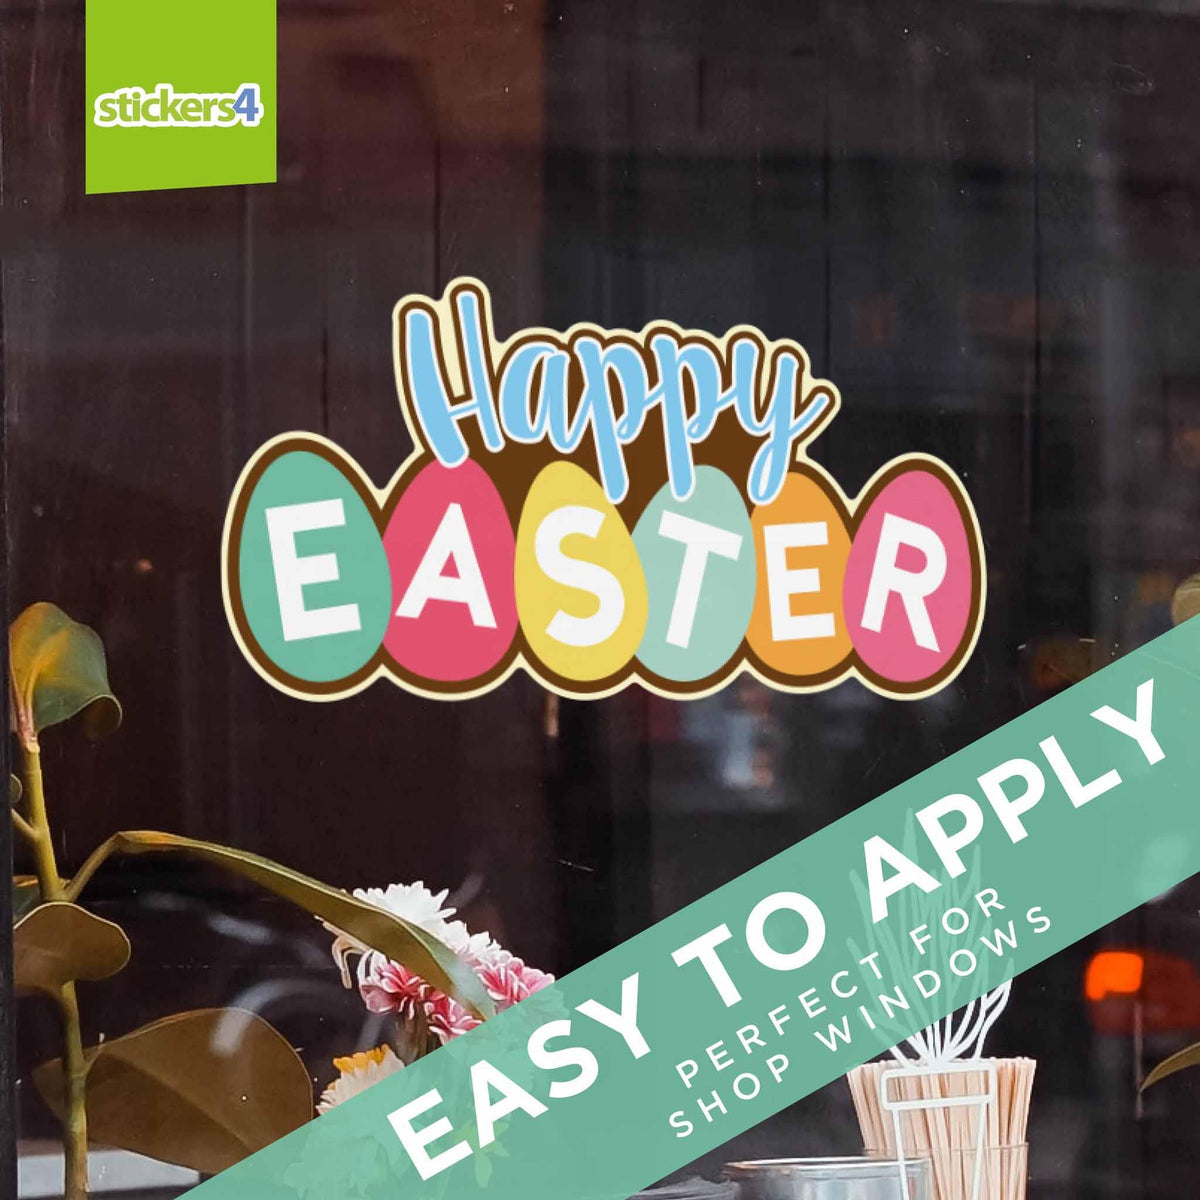 Happy Easter Choccy Eggs Window Cling